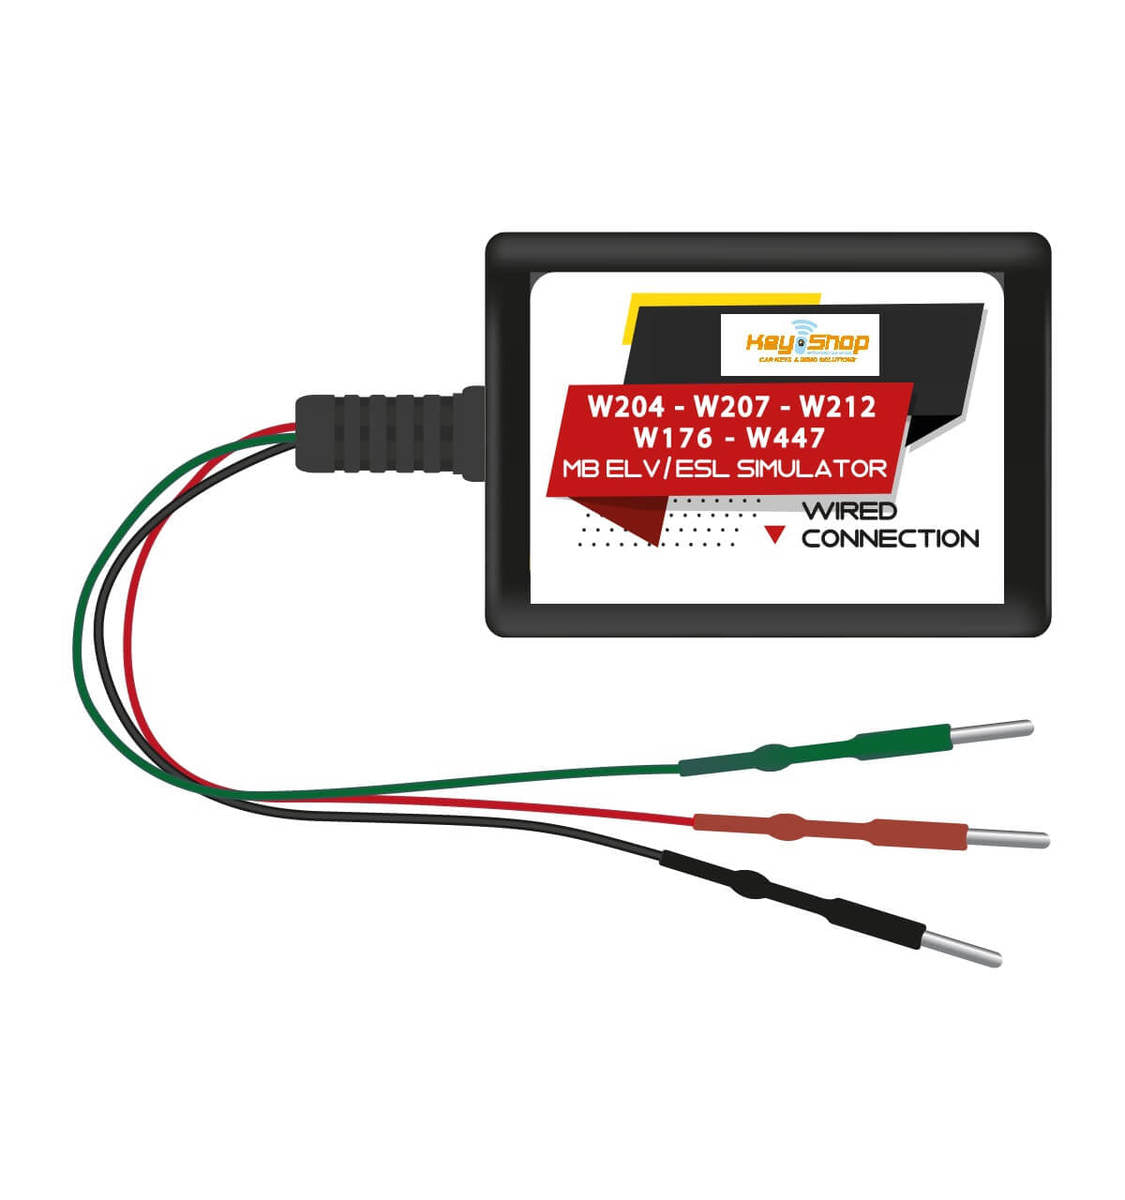 MB Universal Emulator Steering Lock Emulator wired connection for W204